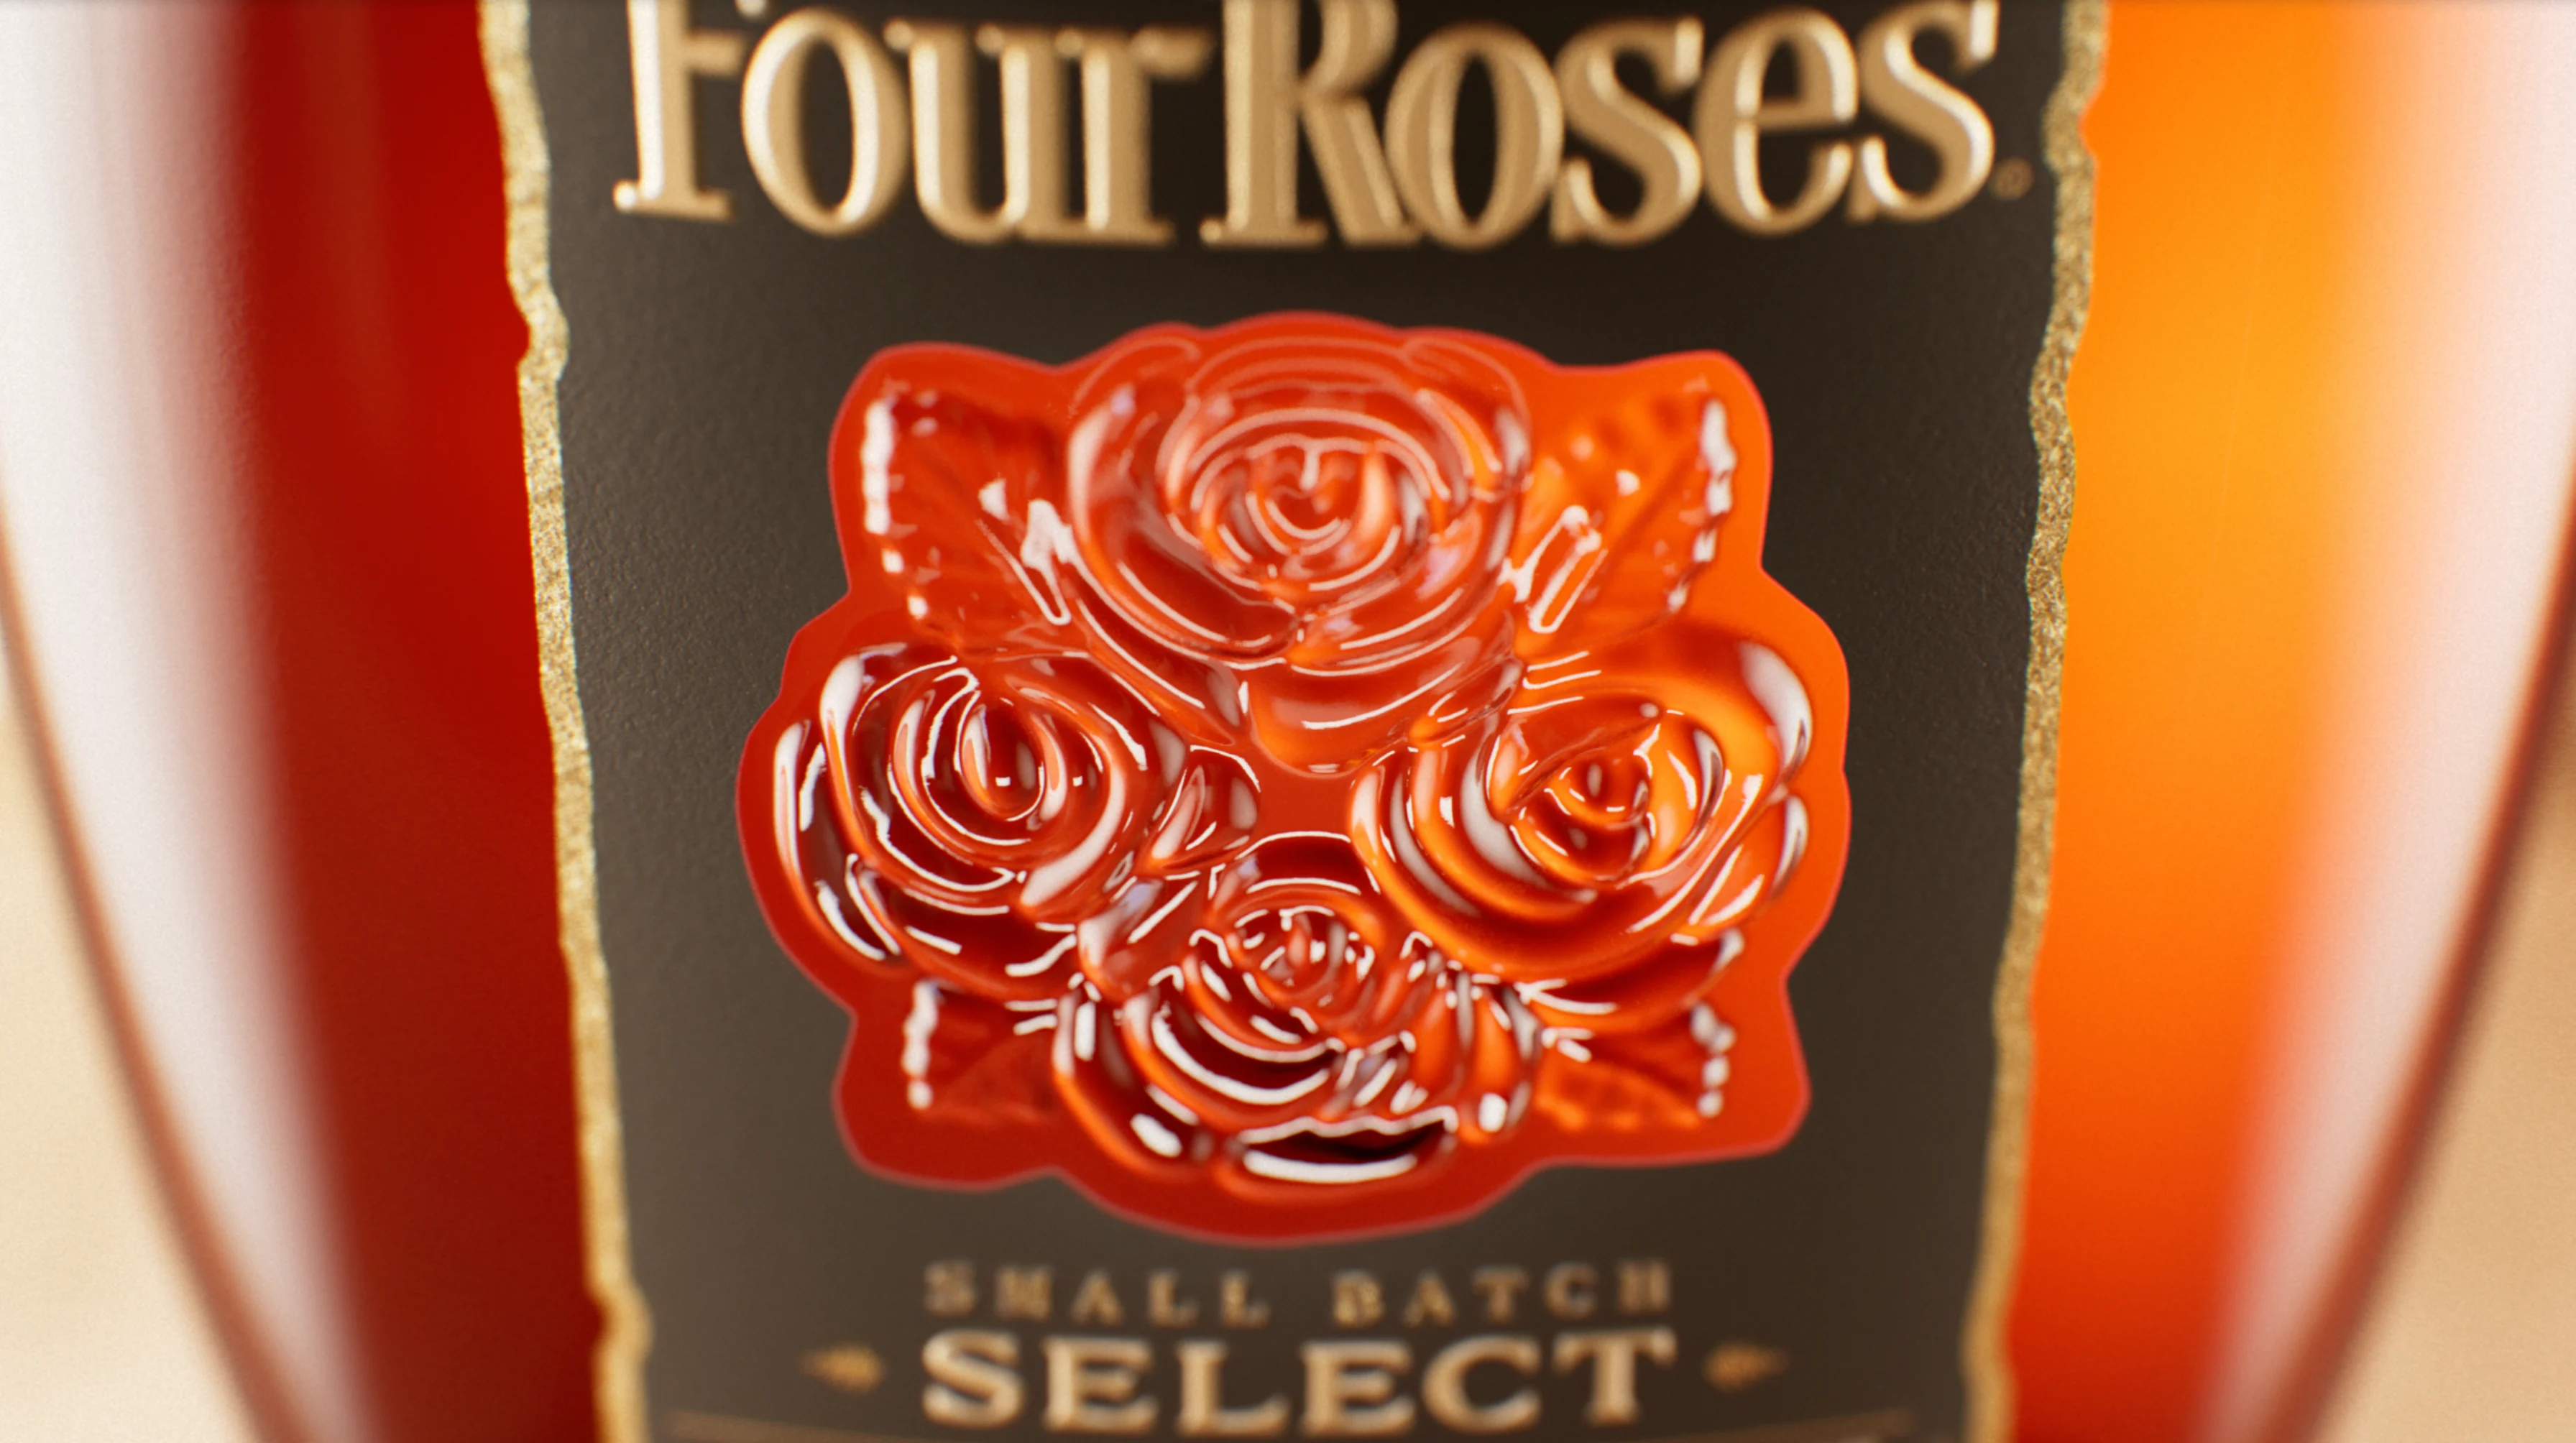 Four Roses Small Batch Select bottle label